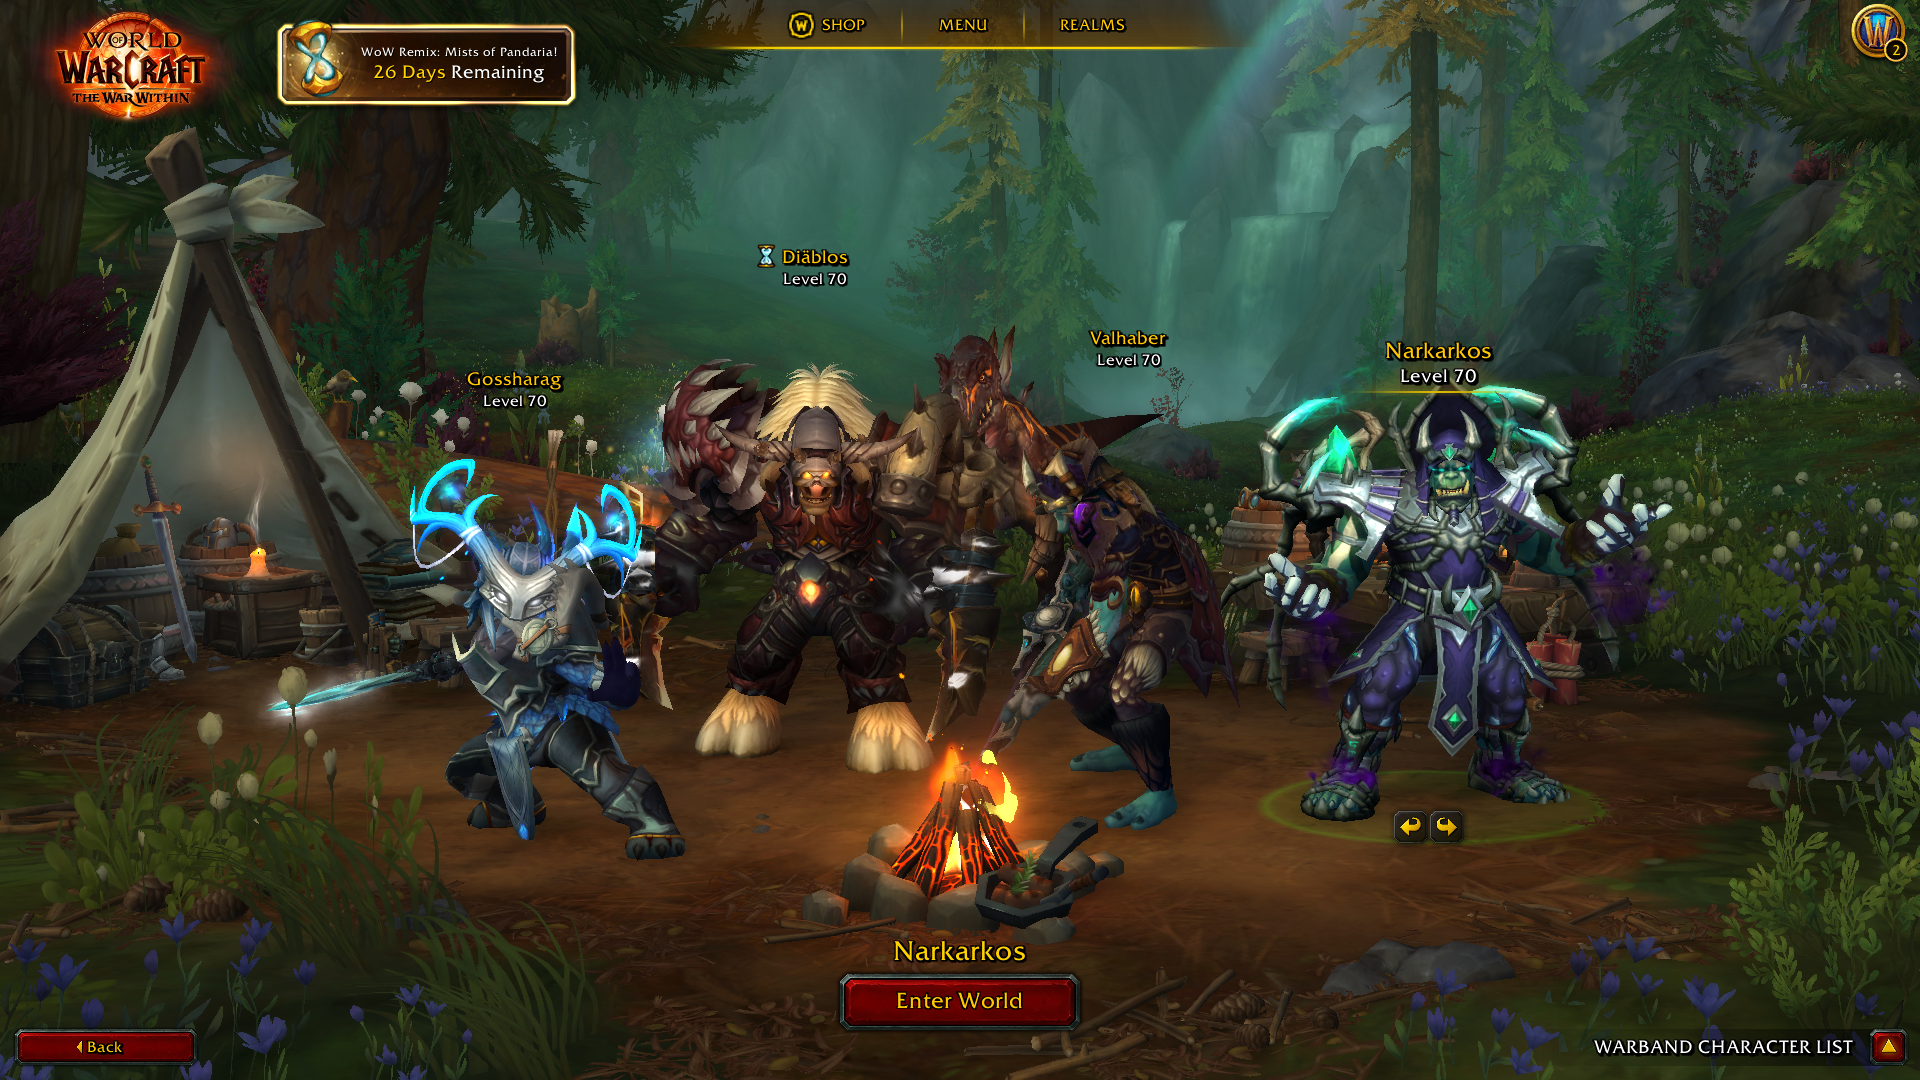 In-game screenshot of the new Warbands feature for World of Warcraft